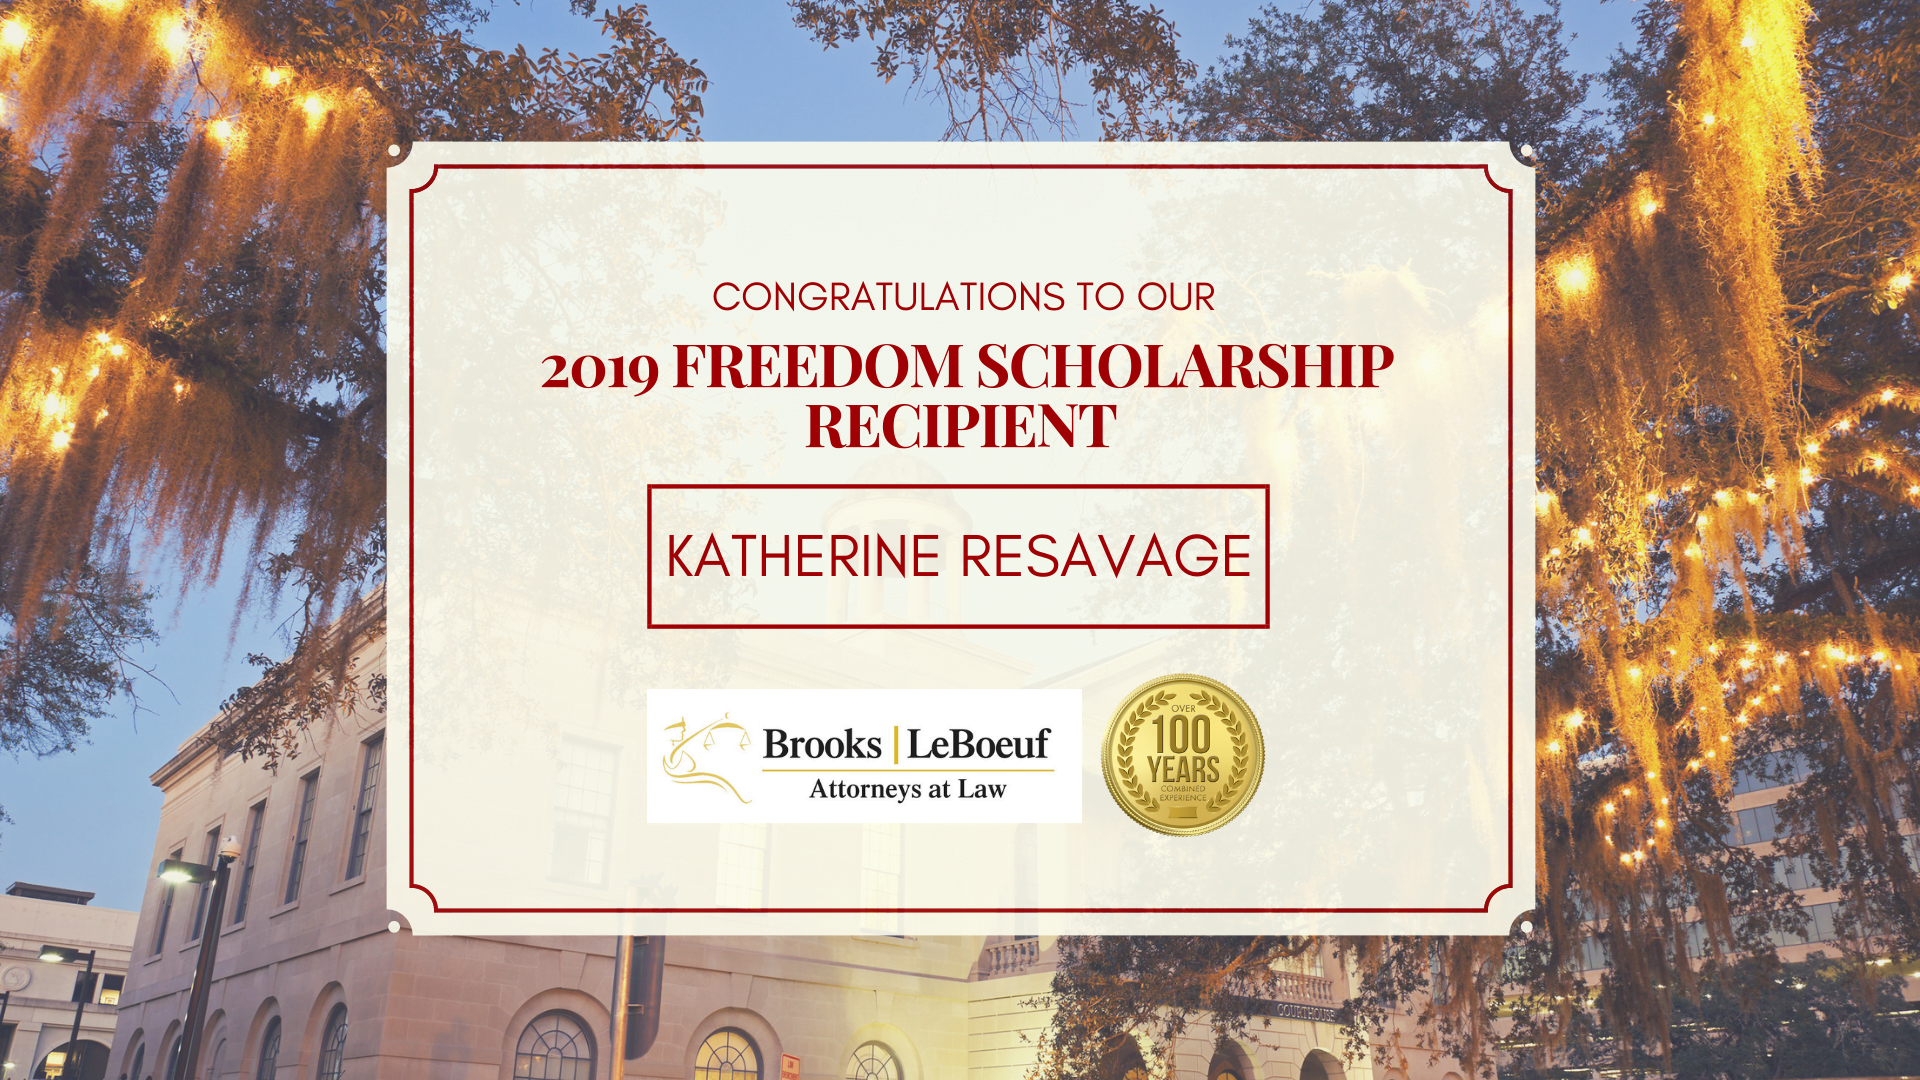 The Recipient of the 2019 Freedom Scholarship